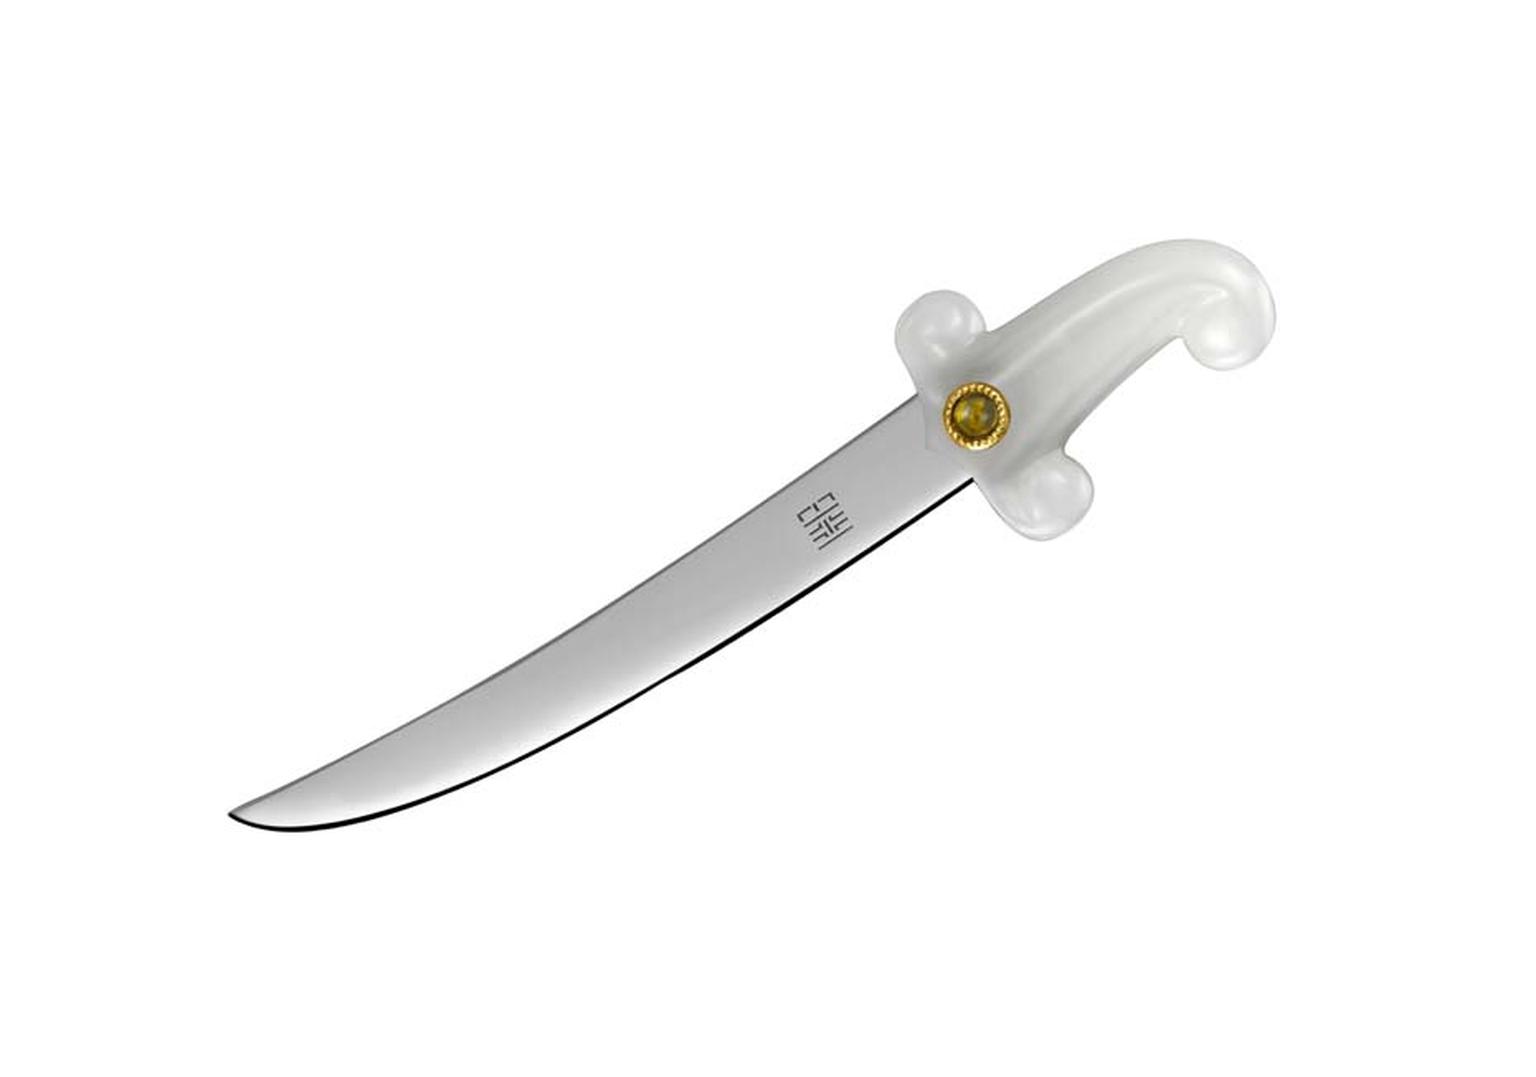 YEWN's Imperial Sword & Amulet collection sword with white and yellow gold can be removed from the scabbard and features a jade grip and a ruby on the guard.